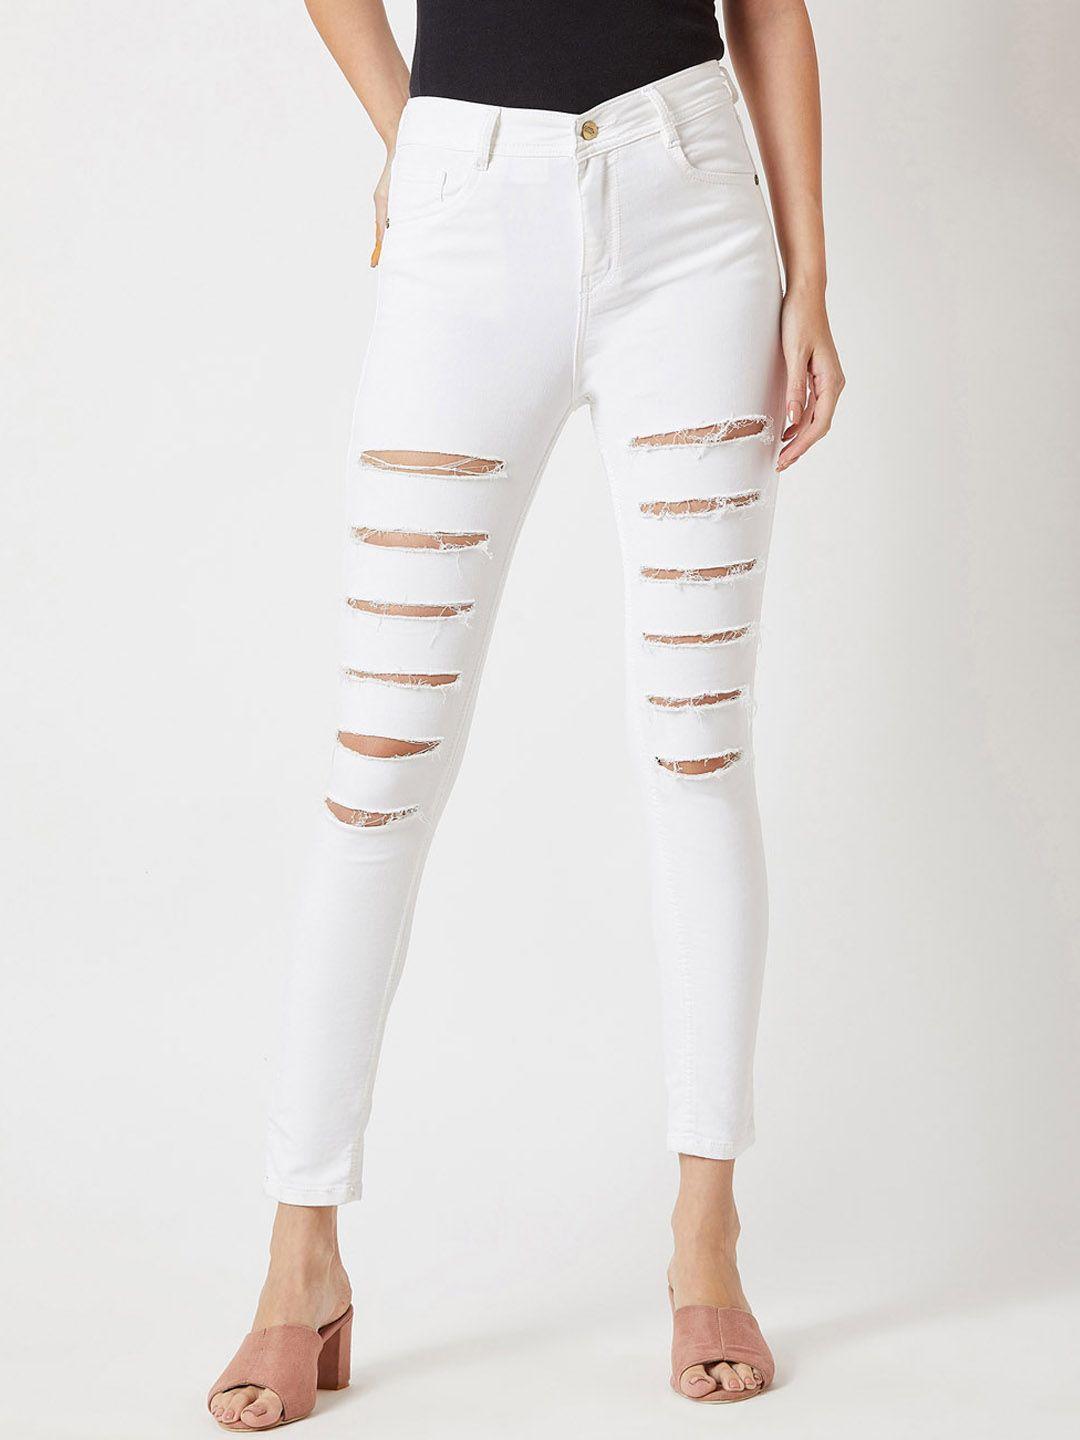 miss-chase-women-white-skinny-fit-high-rise-highly-distressed-stretchable-jeans